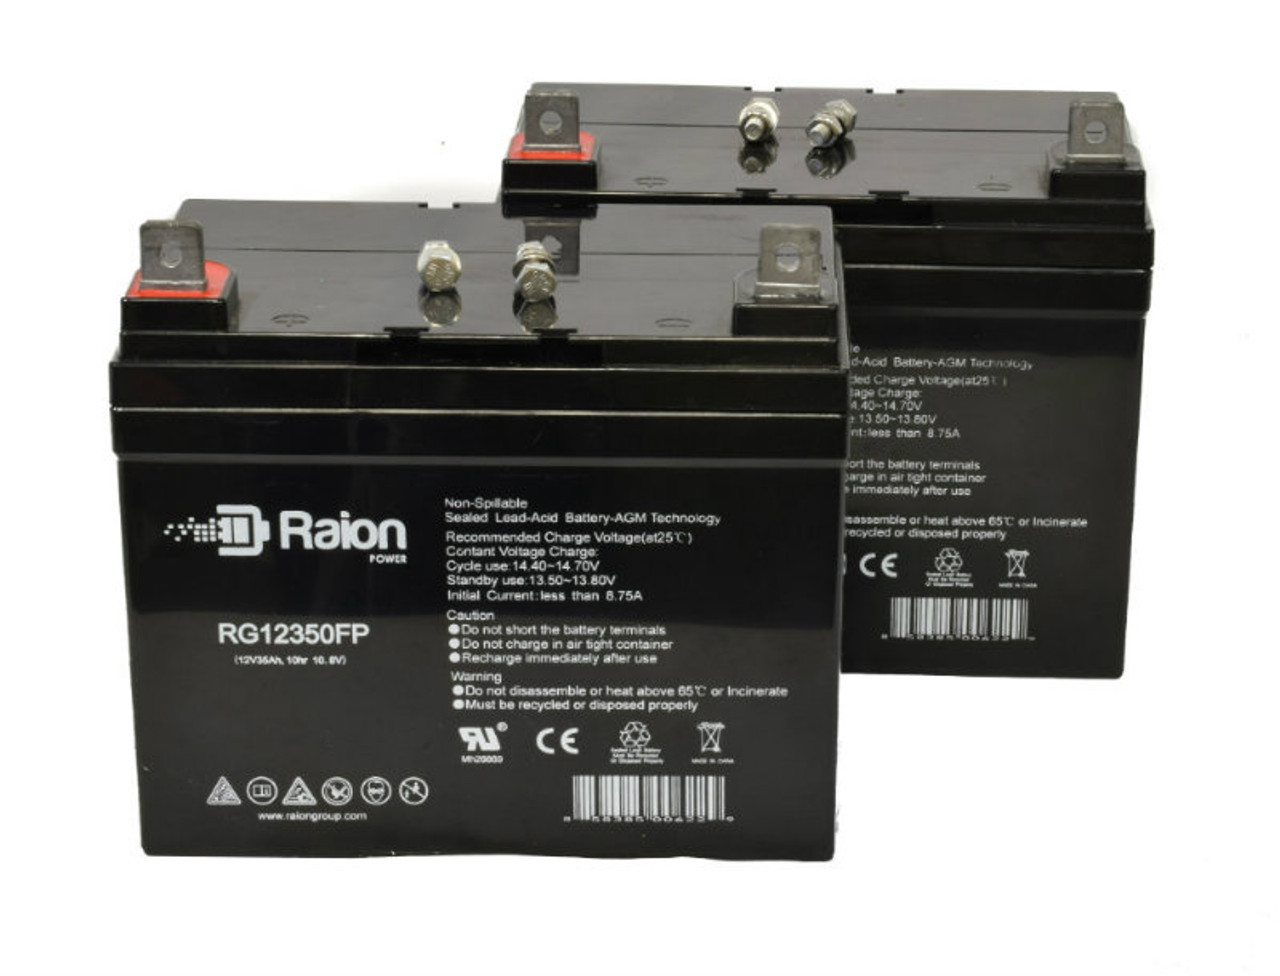 Raion Power Replacement 12V 35Ah Lawn Mower Battery for Agco Allis 1316H - 2 Pack